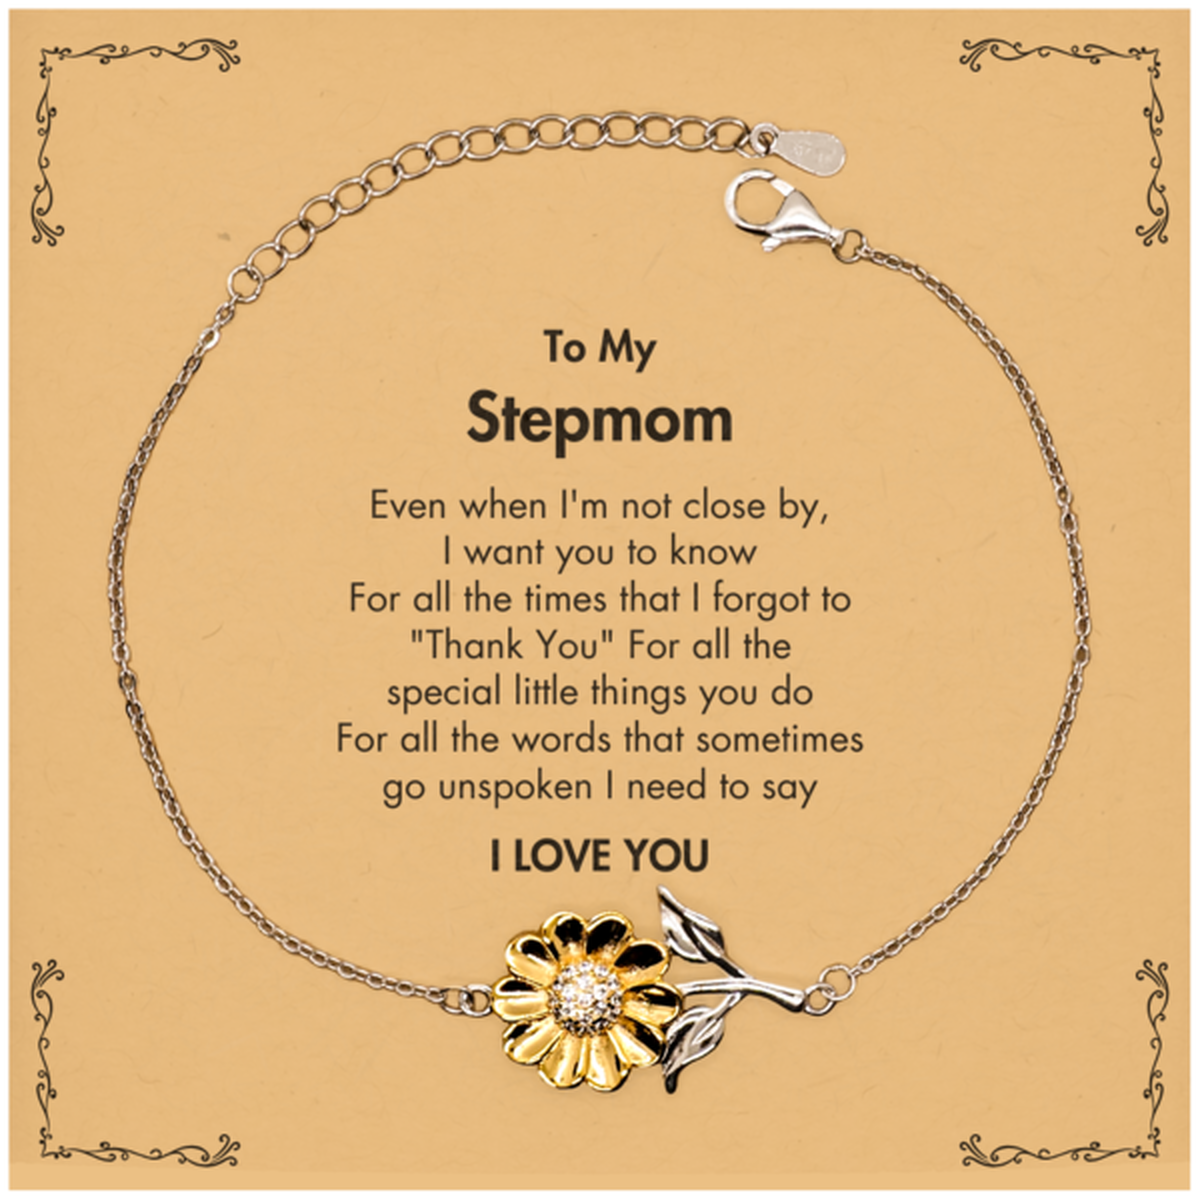 Thank You Gifts for Stepmom, Keepsake Sunflower Bracelet Gifts for Stepmom Birthday Mother's day Father's Day Stepmom For all the words That sometimes go unspoken I need to say I LOVE YOU